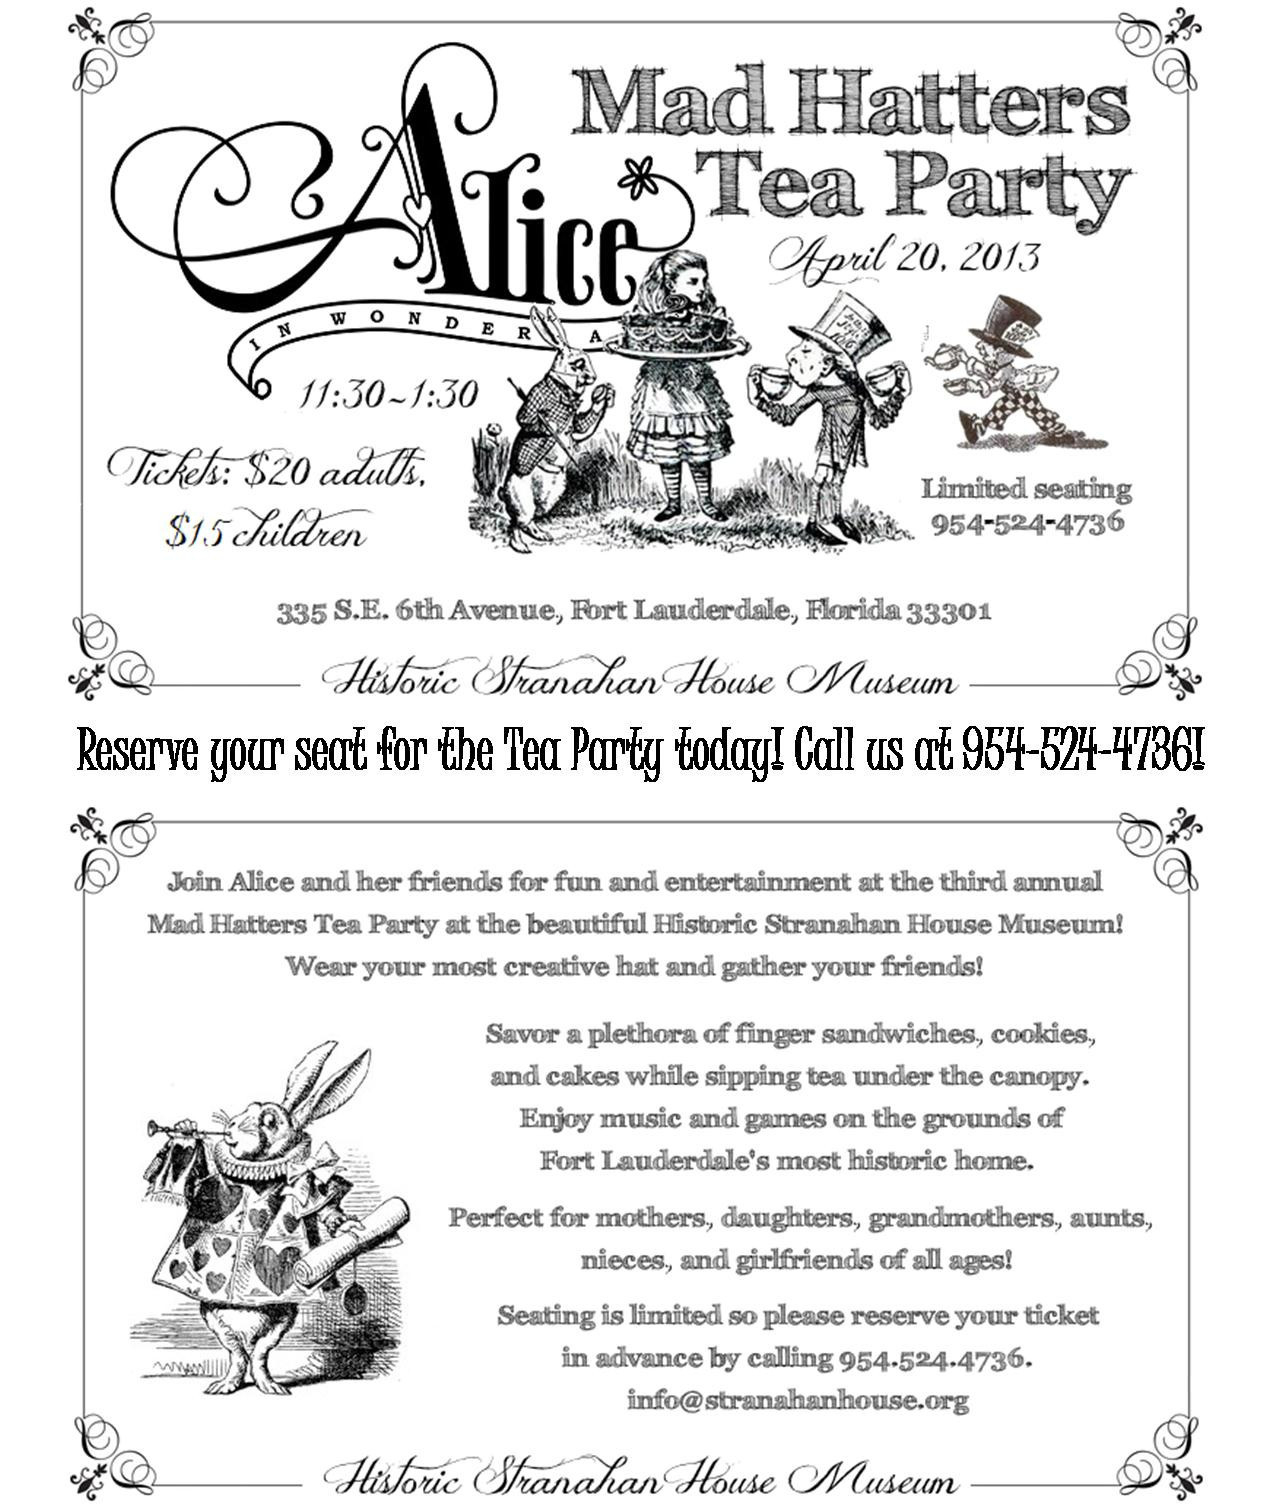 Mad Hatter Tea Party Invitations Awesome Mad Hatter Tea Party - Mad Hatter Tea Party Invitations Free Printable